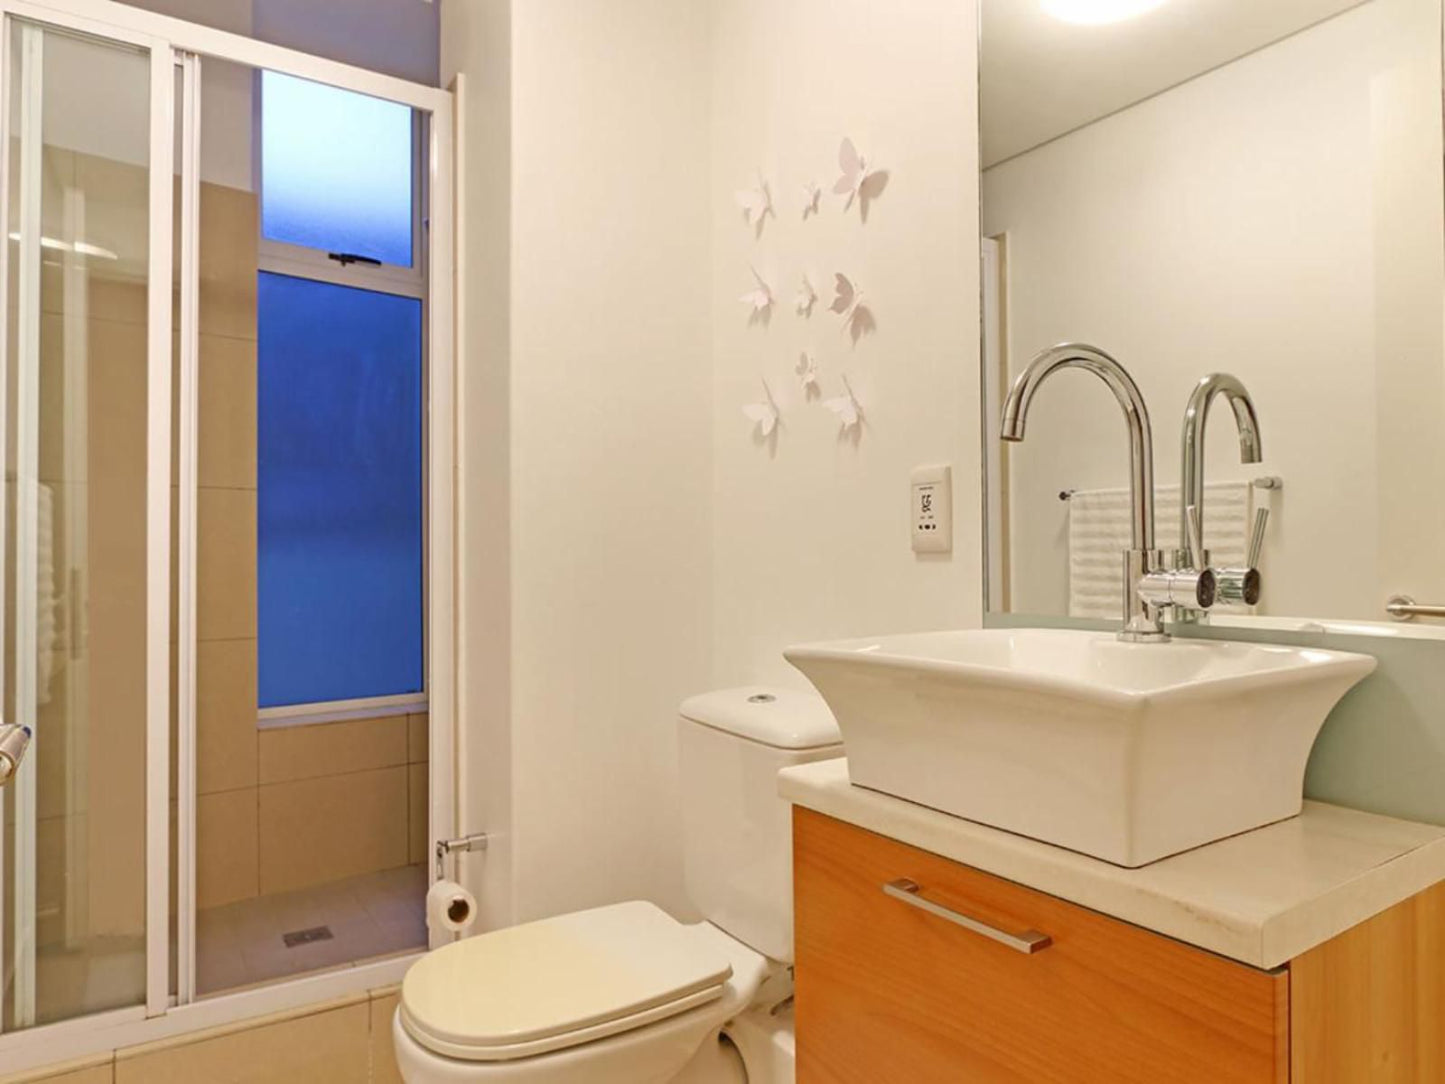 Horizon Bay 103 By Hostagents Bloubergstrand Blouberg Western Cape South Africa Bathroom